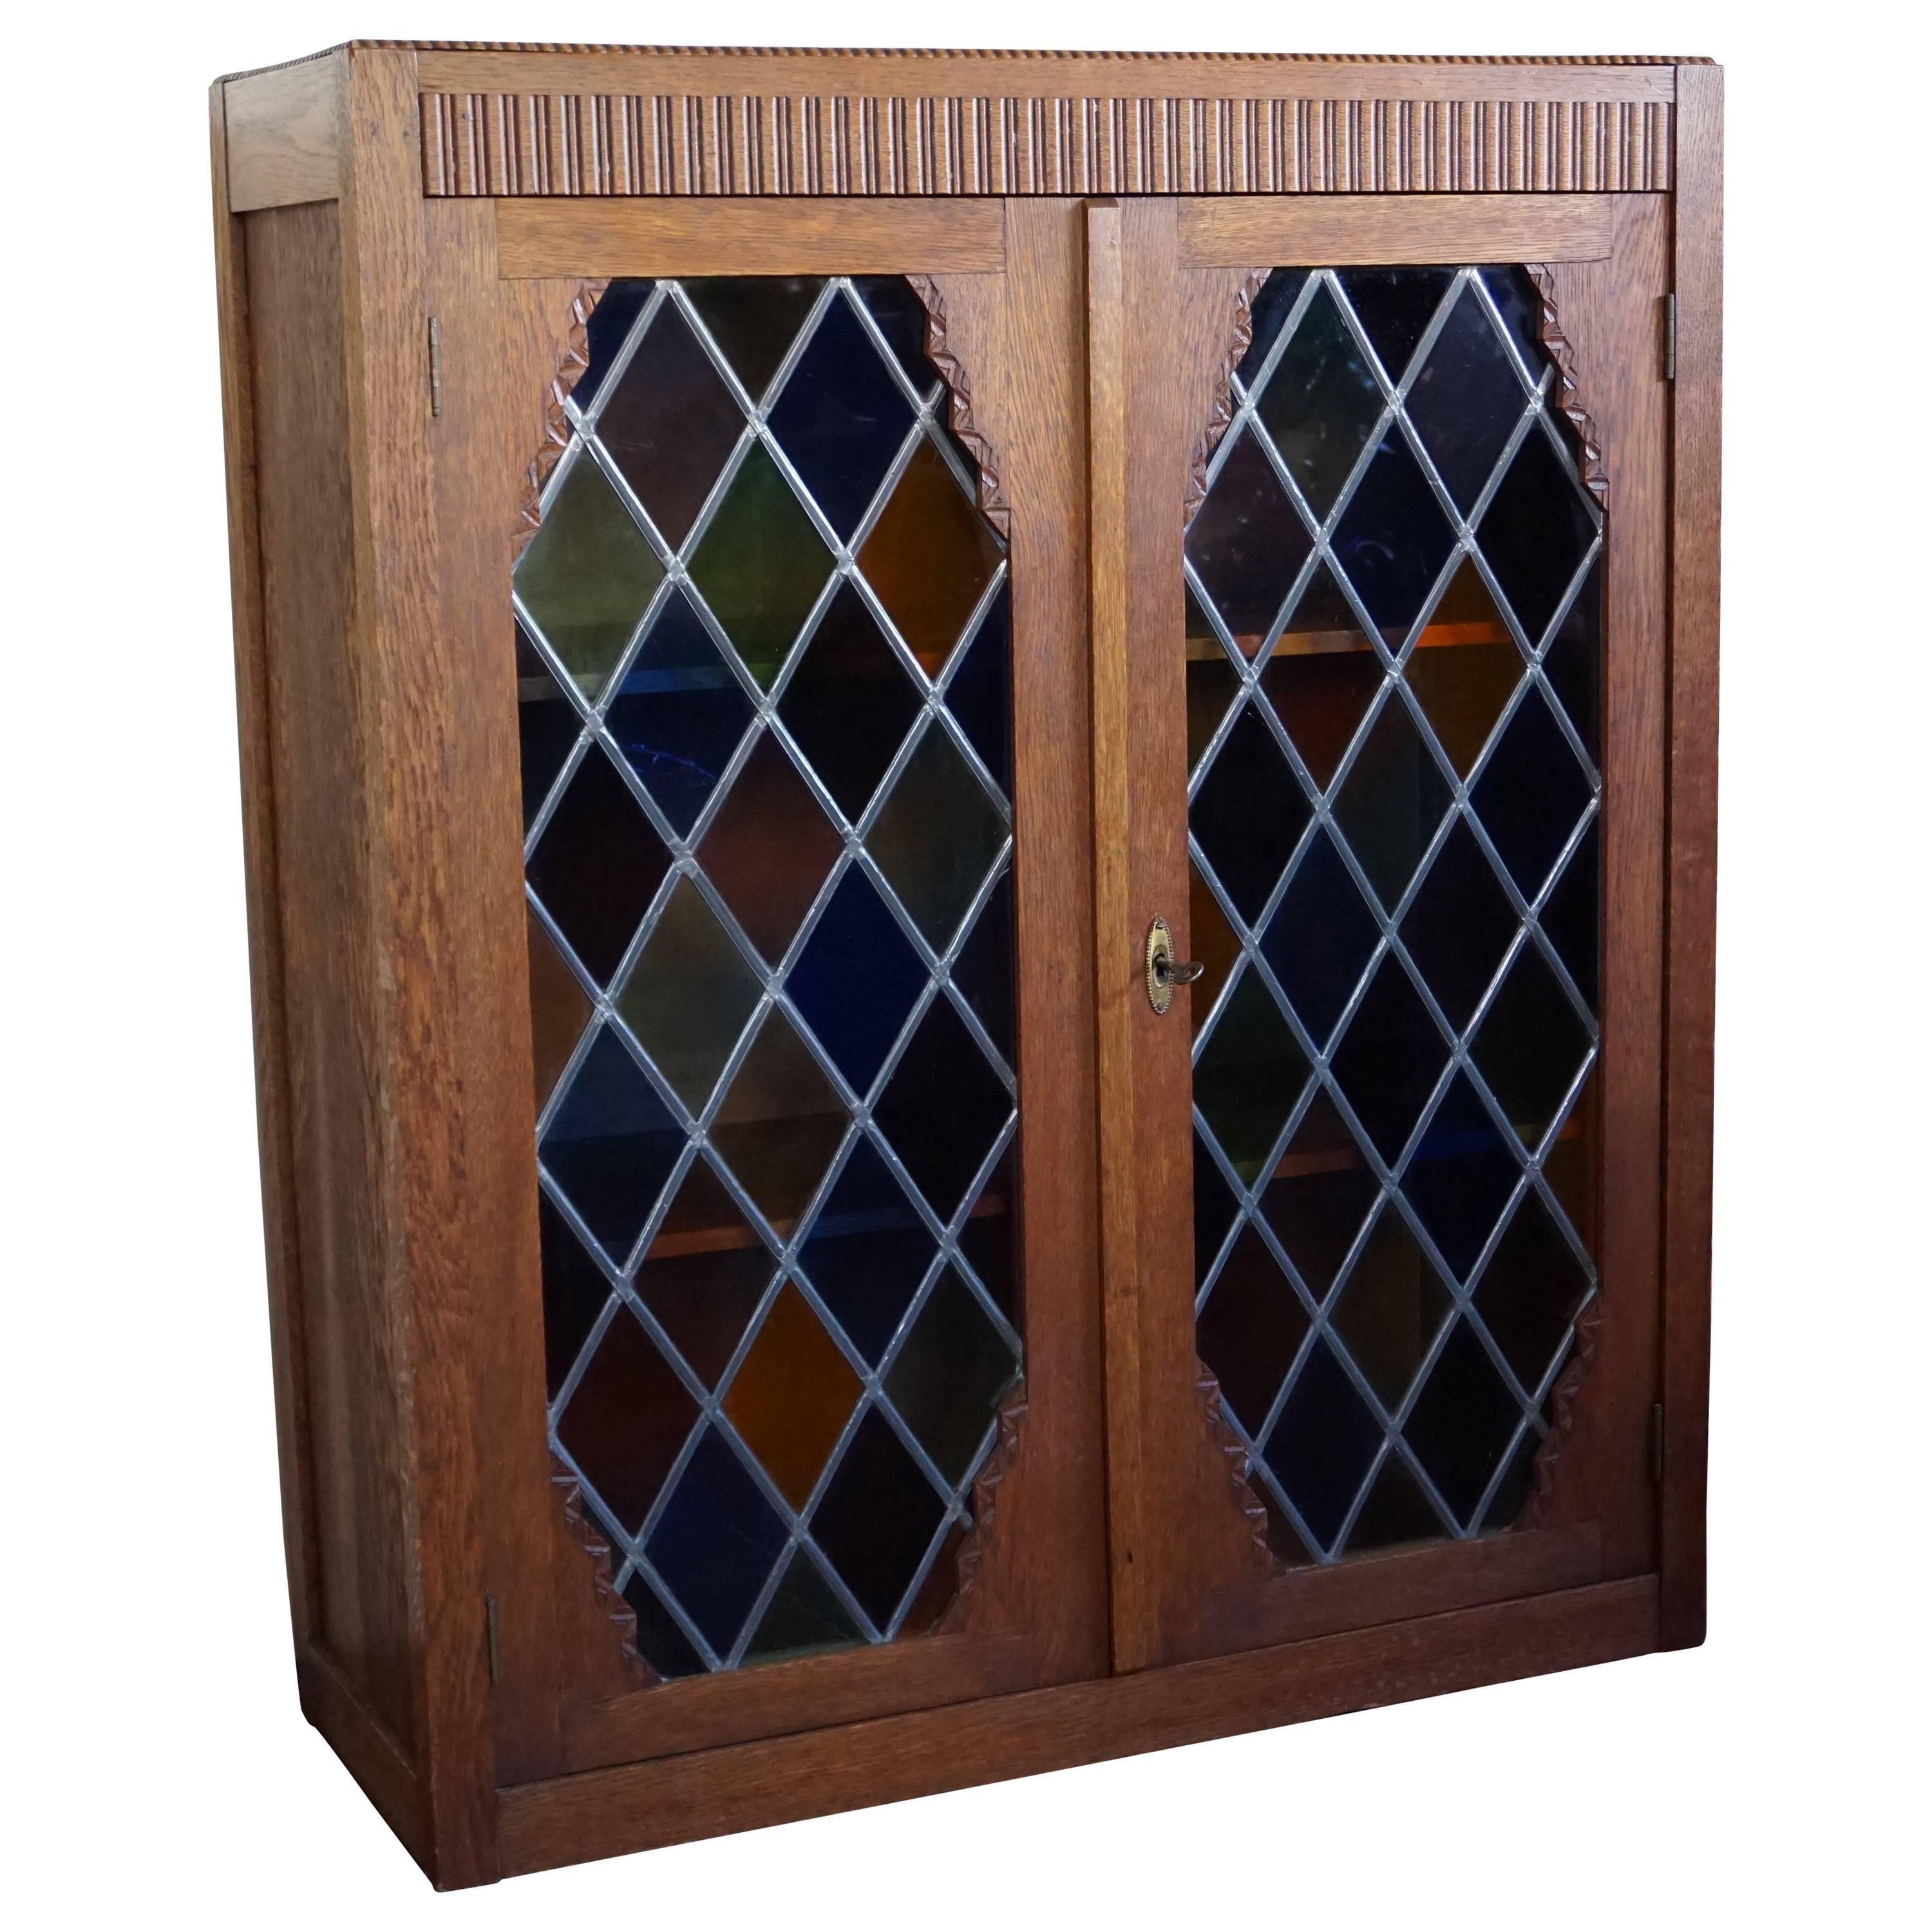 Small Handcrafted Art Deco 1930s Bookcase with Stunning Stained Glass Windows